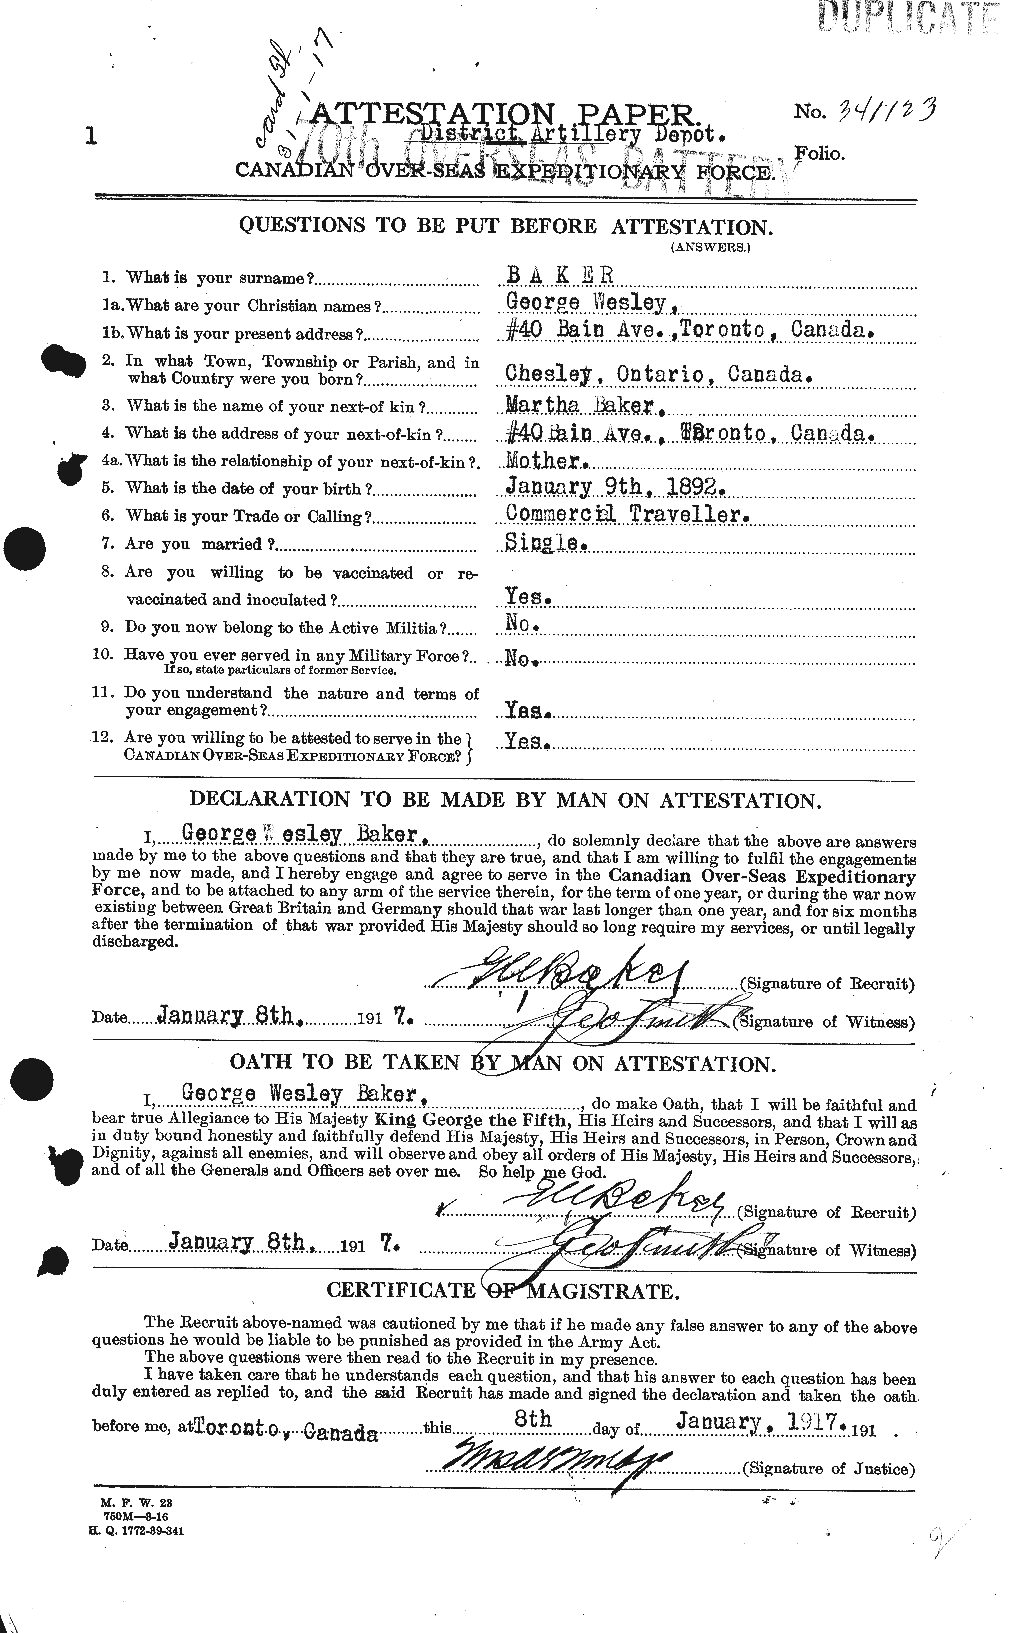 Personnel Records of the First World War - CEF 216224a